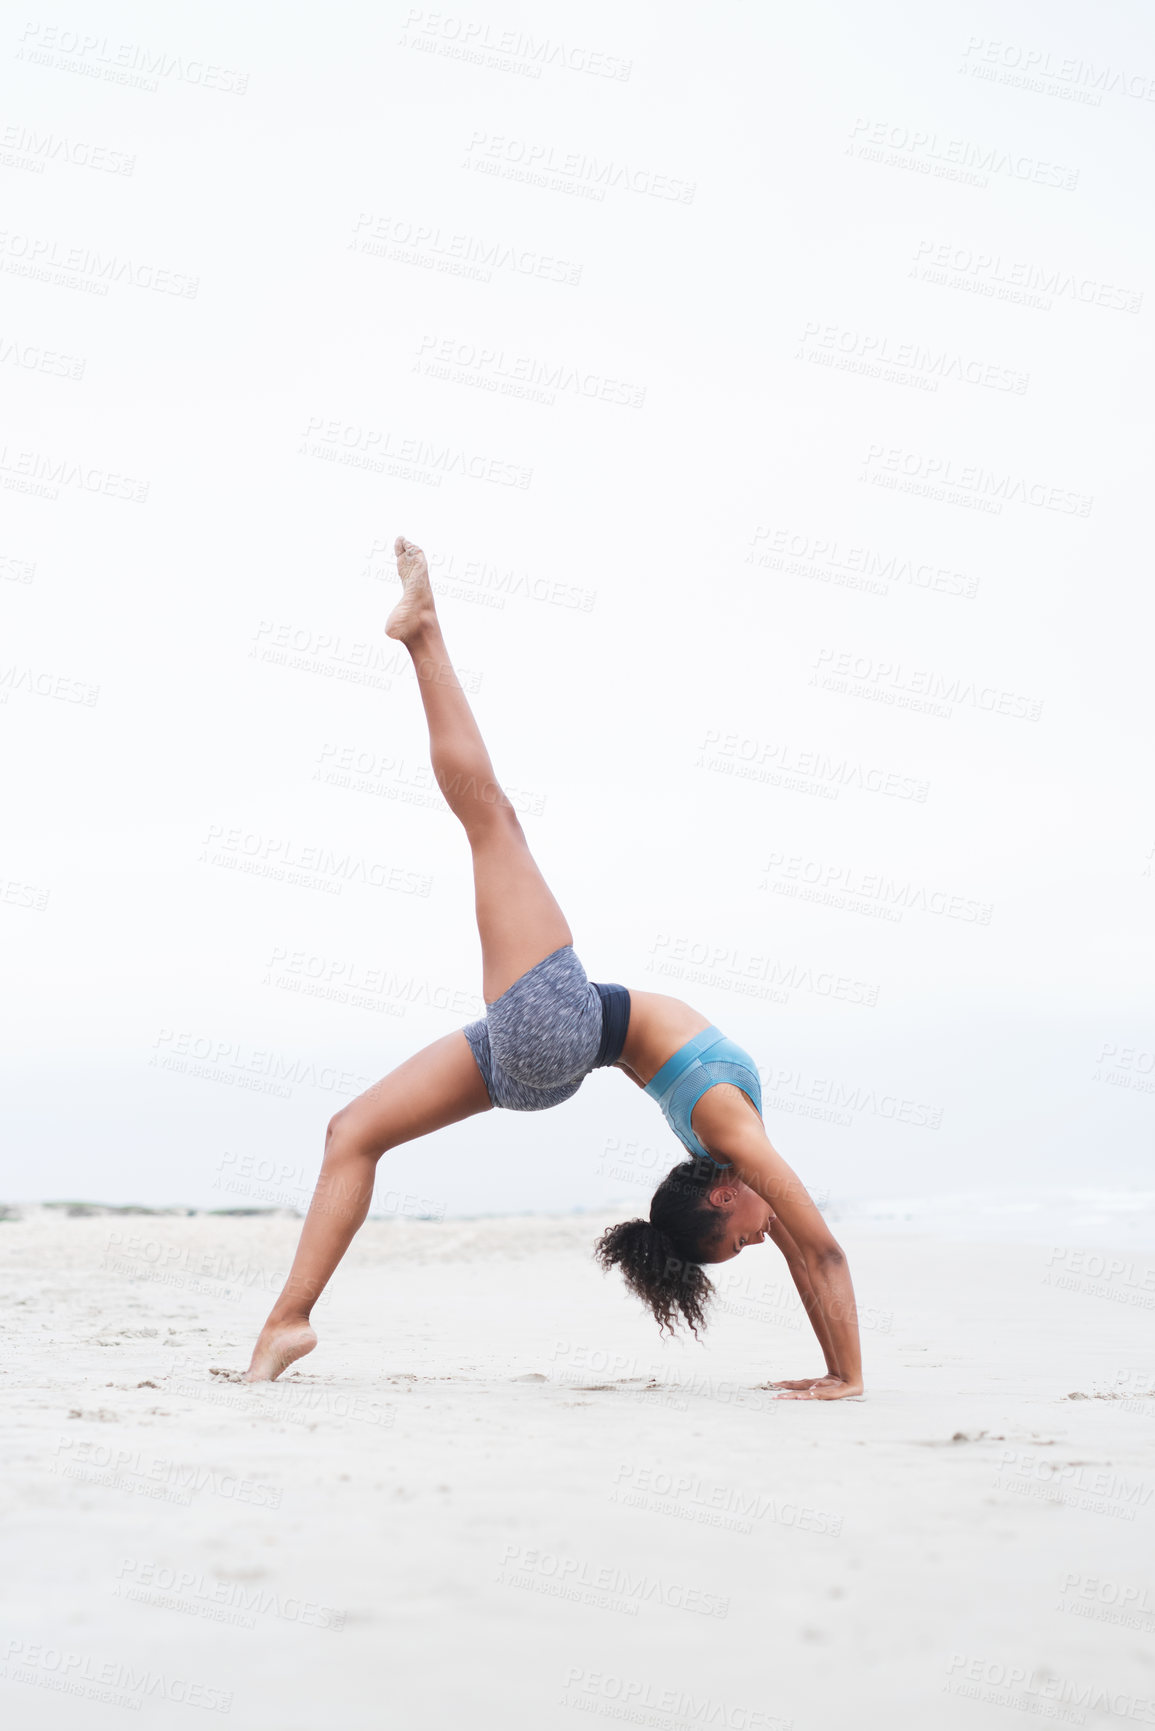 Buy stock photo Shot of a young woman doing a handstand at the beach